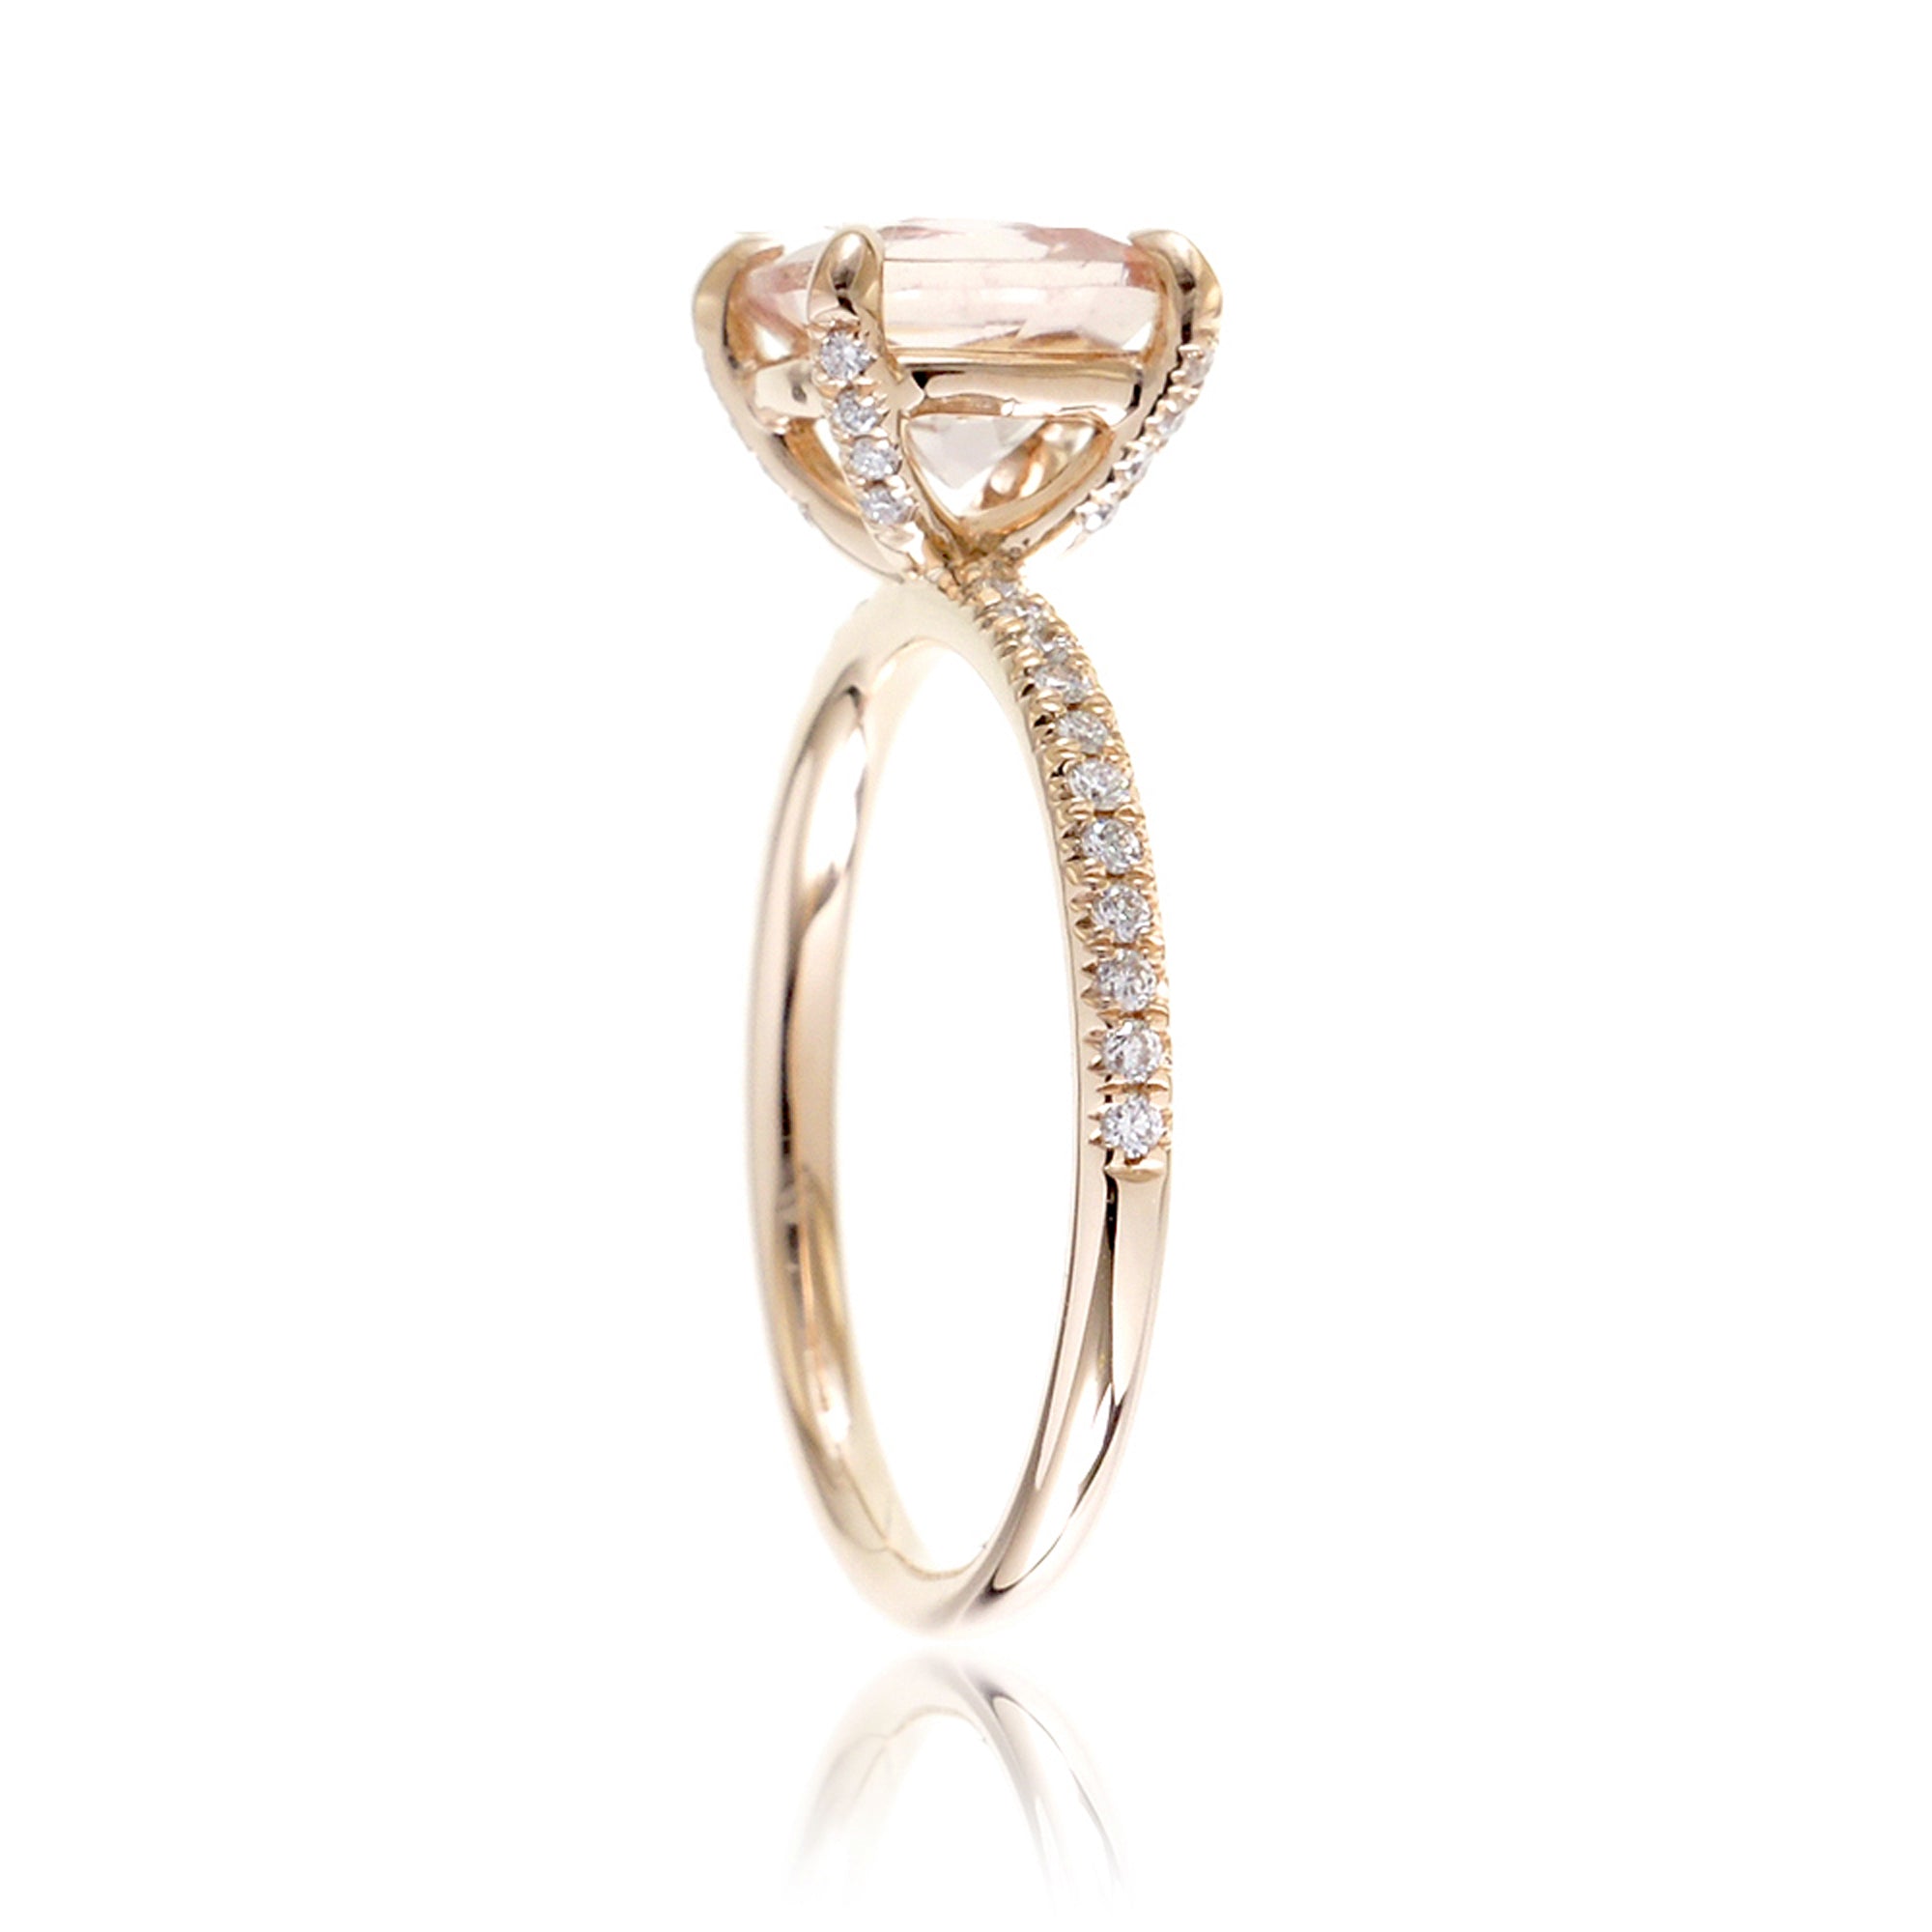 Square cushion morganite diamond band ring in yellow gold - The Ava